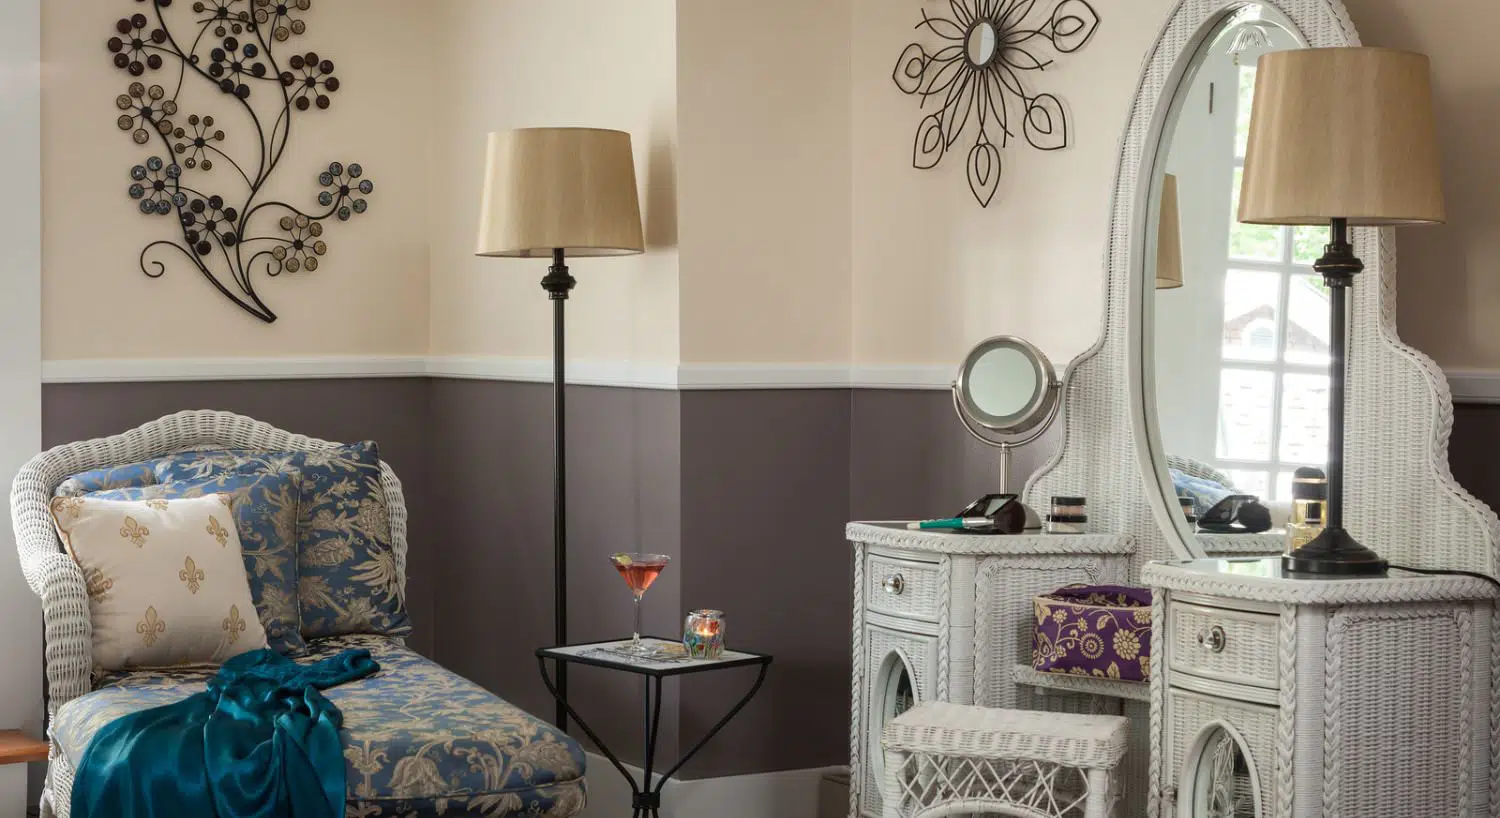 Room with cream walls on top and dark gray walls below chair rail, white wicker chaise and make-up dresser, and wrought iron lamps